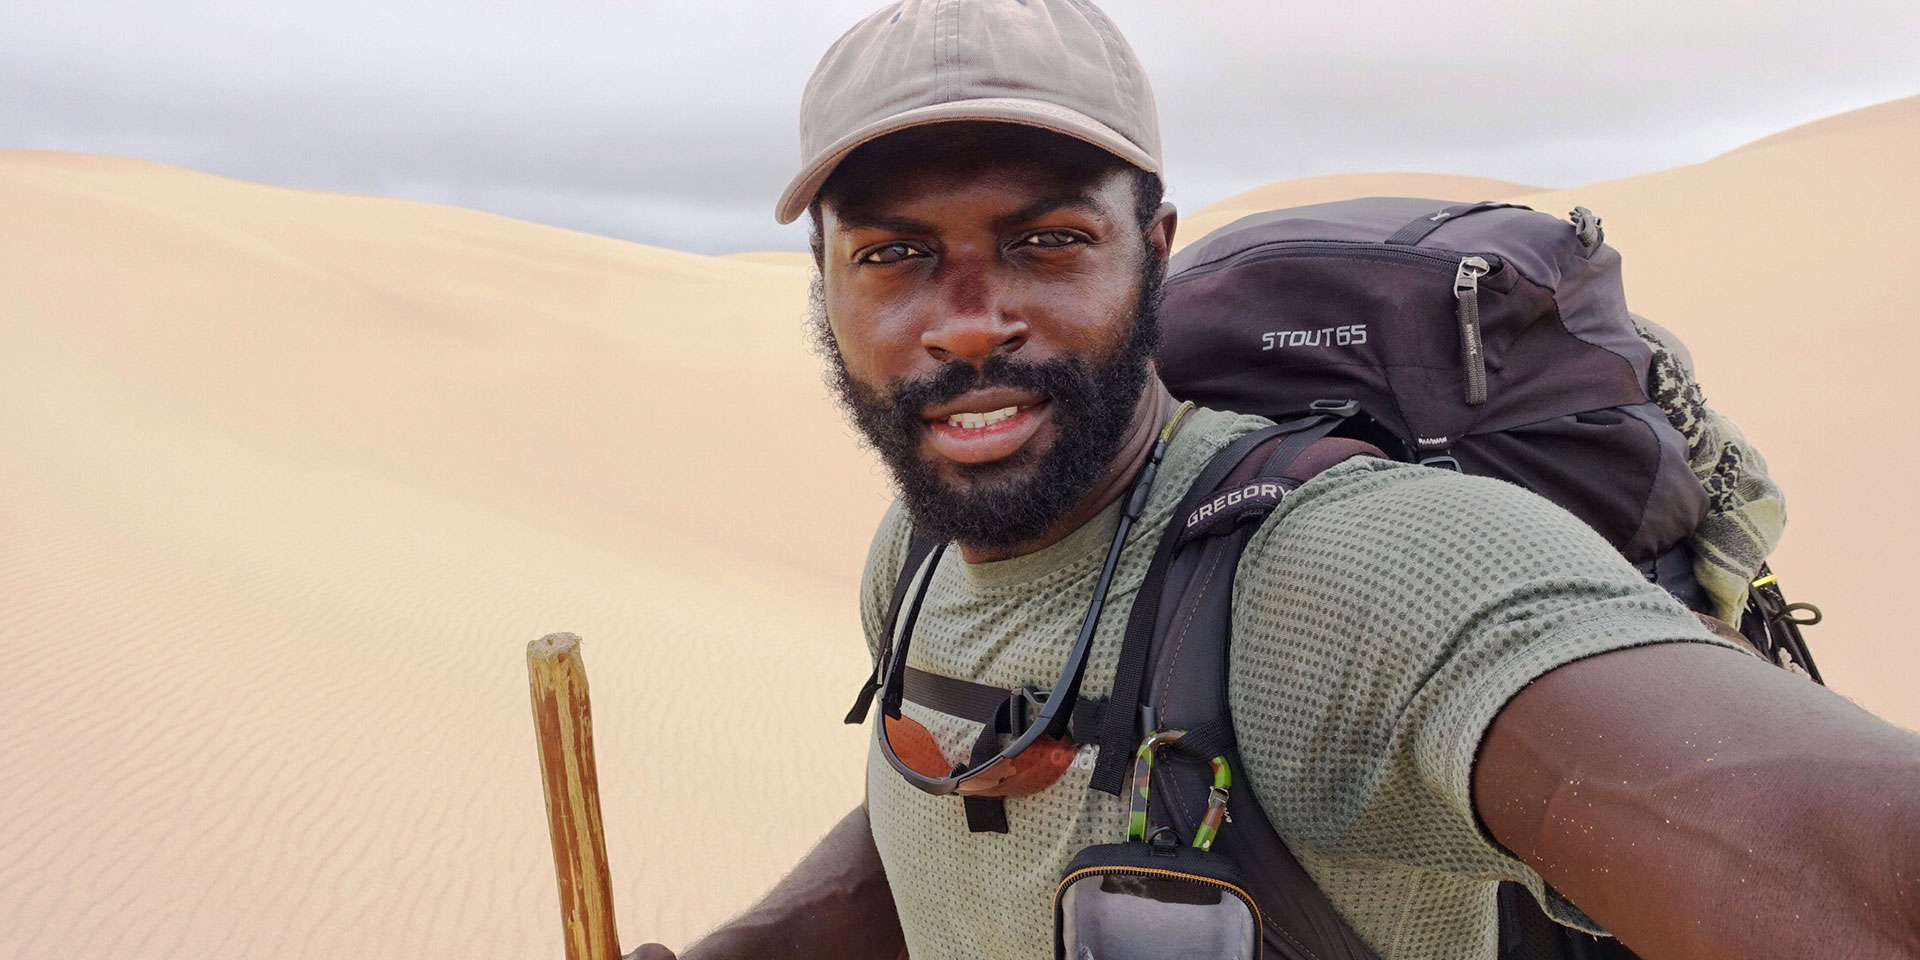 From Cape Town to Cairo on Foot: What Mario Rigby Learned on His Trek Across Africa